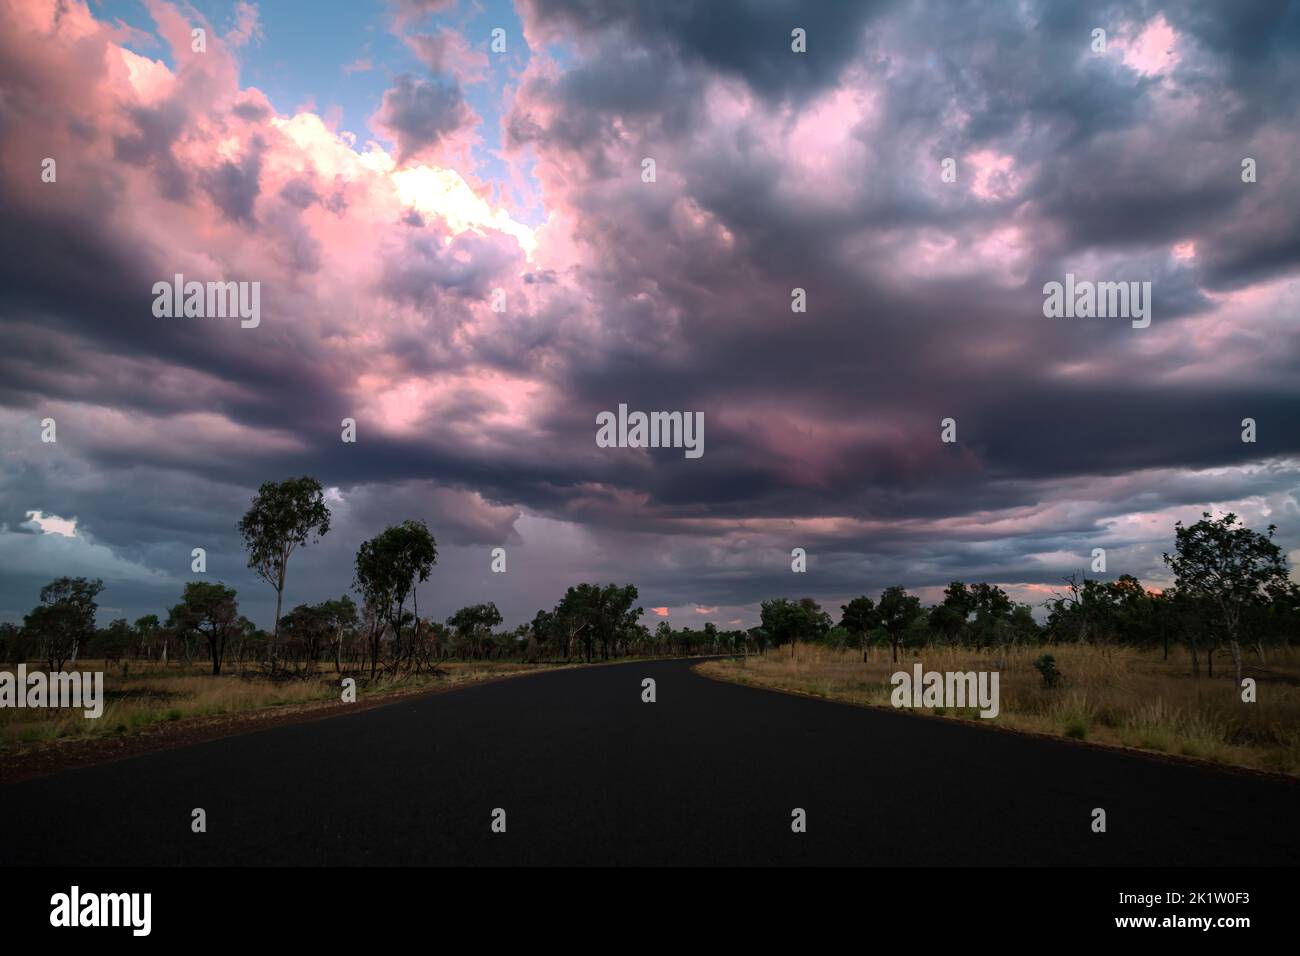 Road in wet season in the tropical north of Australia comes with thunderstorms and dark, dramatic clouds Stock Photo